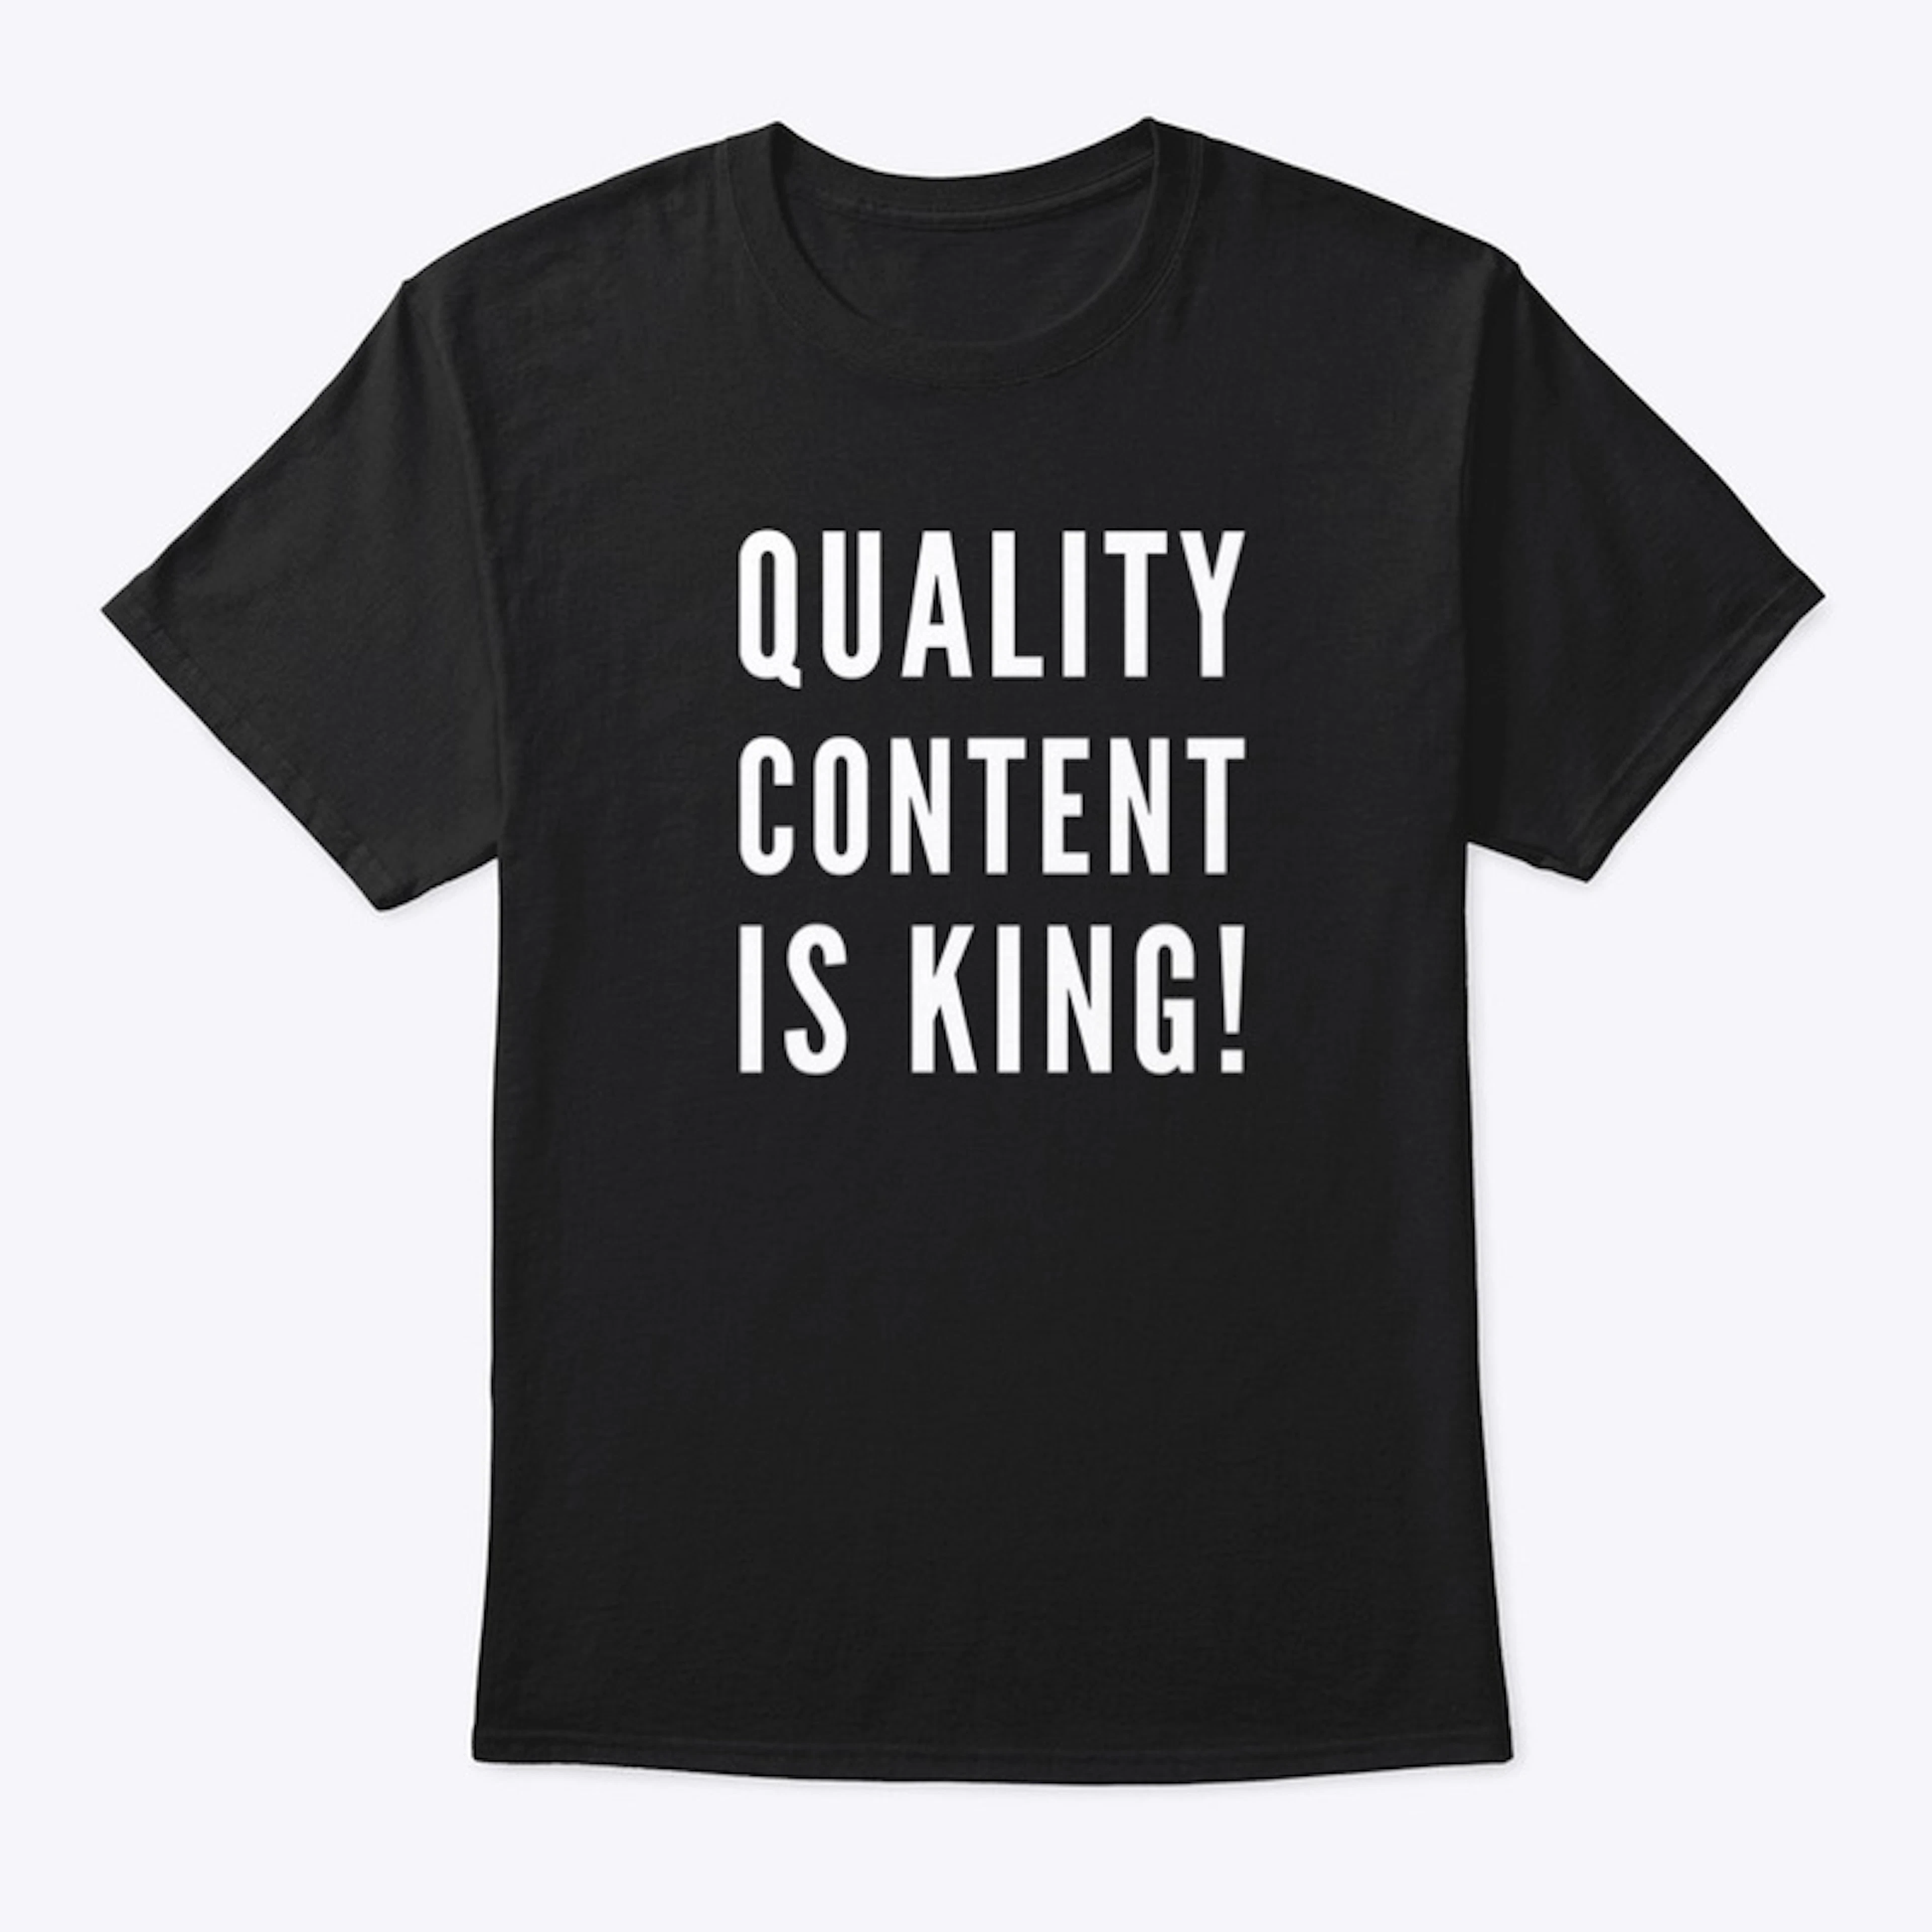 QUALITY CONTENT IS KING!